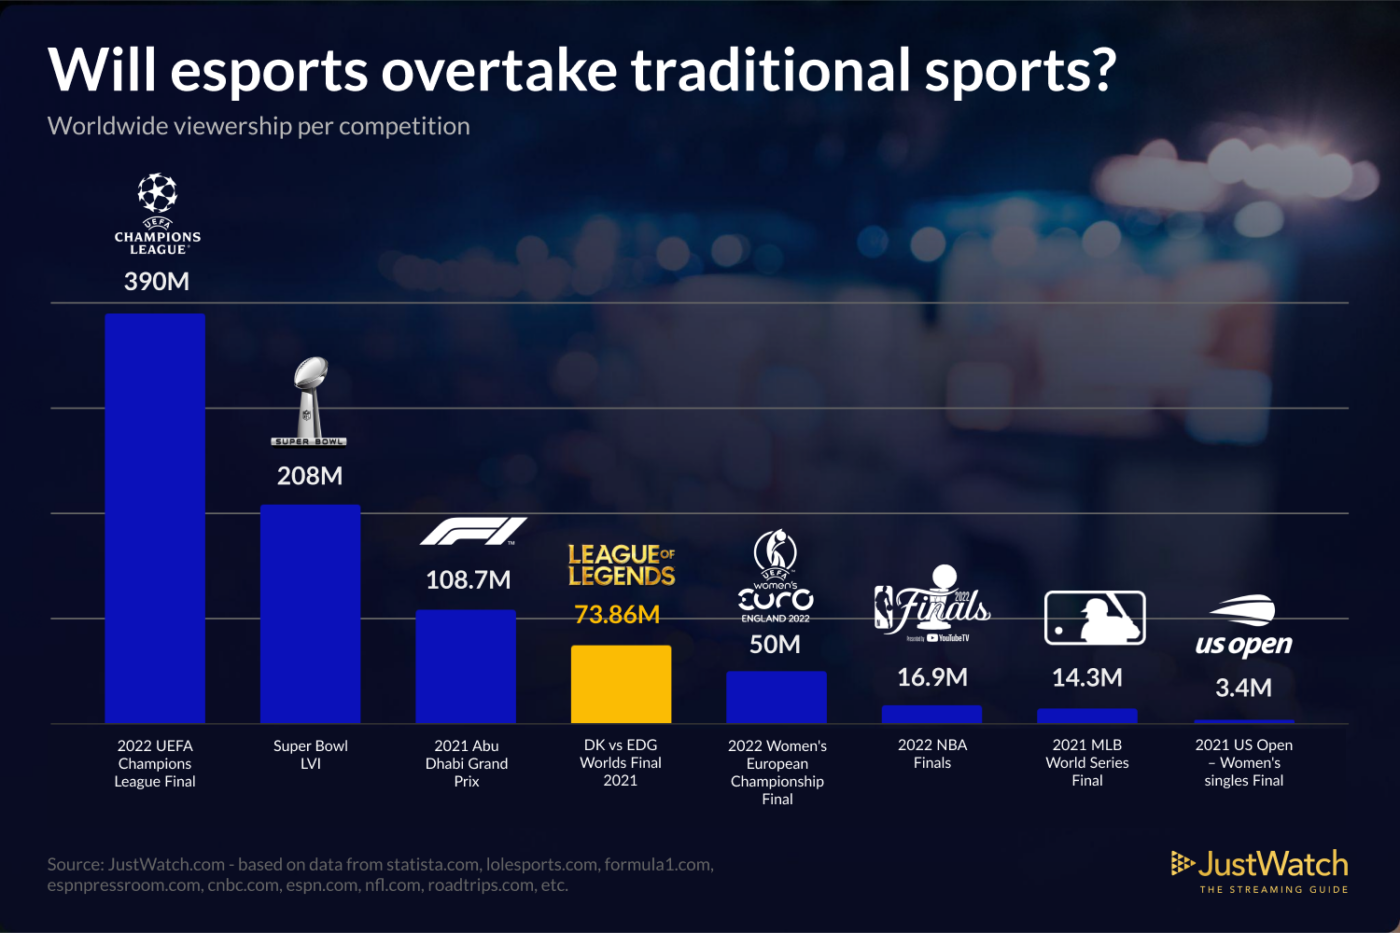 Will esports overtake traditional sports?